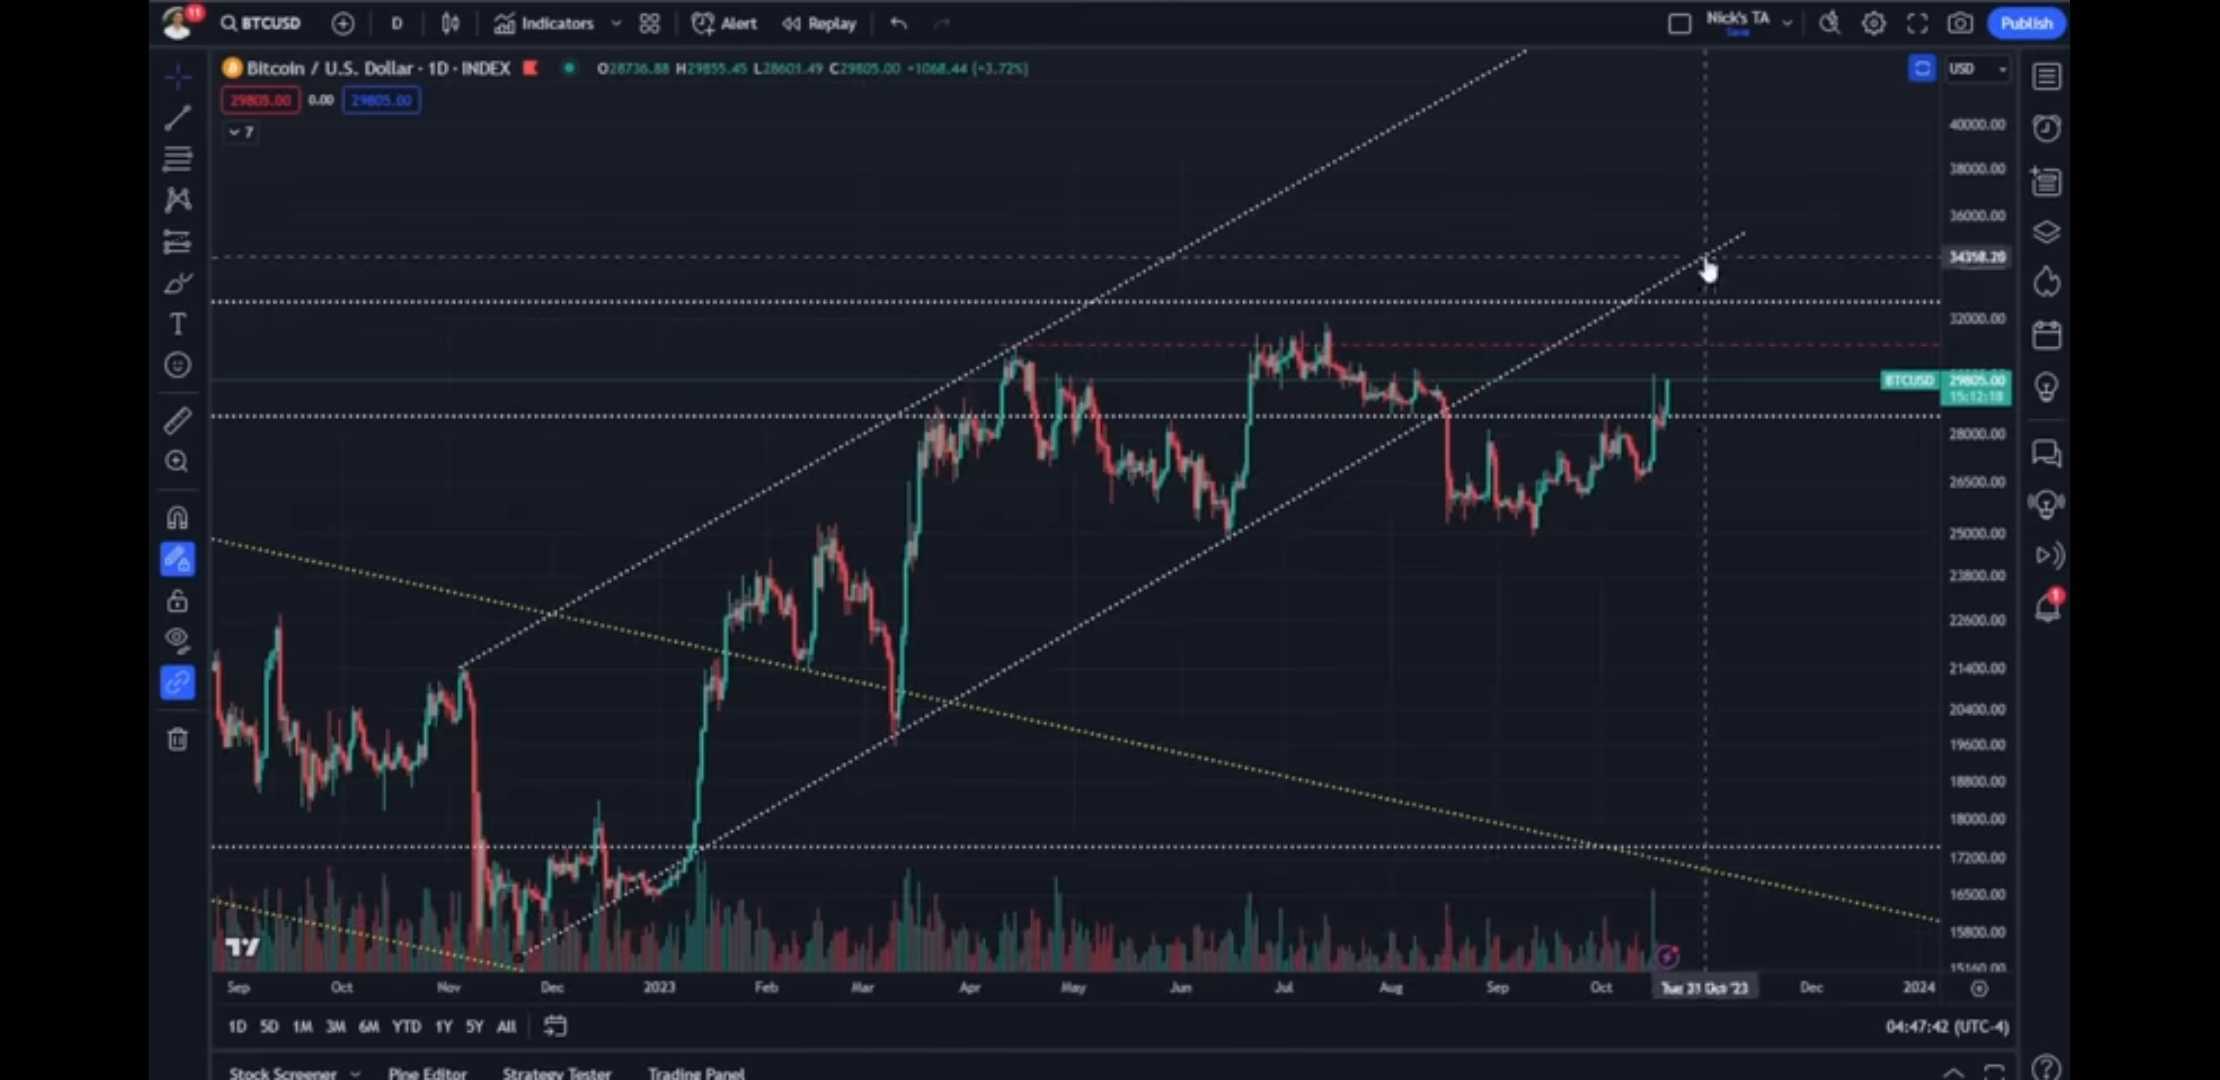 Analyst Nicholas Merten Predicts Bitcoin (BTC) Will Be Hit Hard by Resistance and Make Move to the Downside - The Daily Hodl